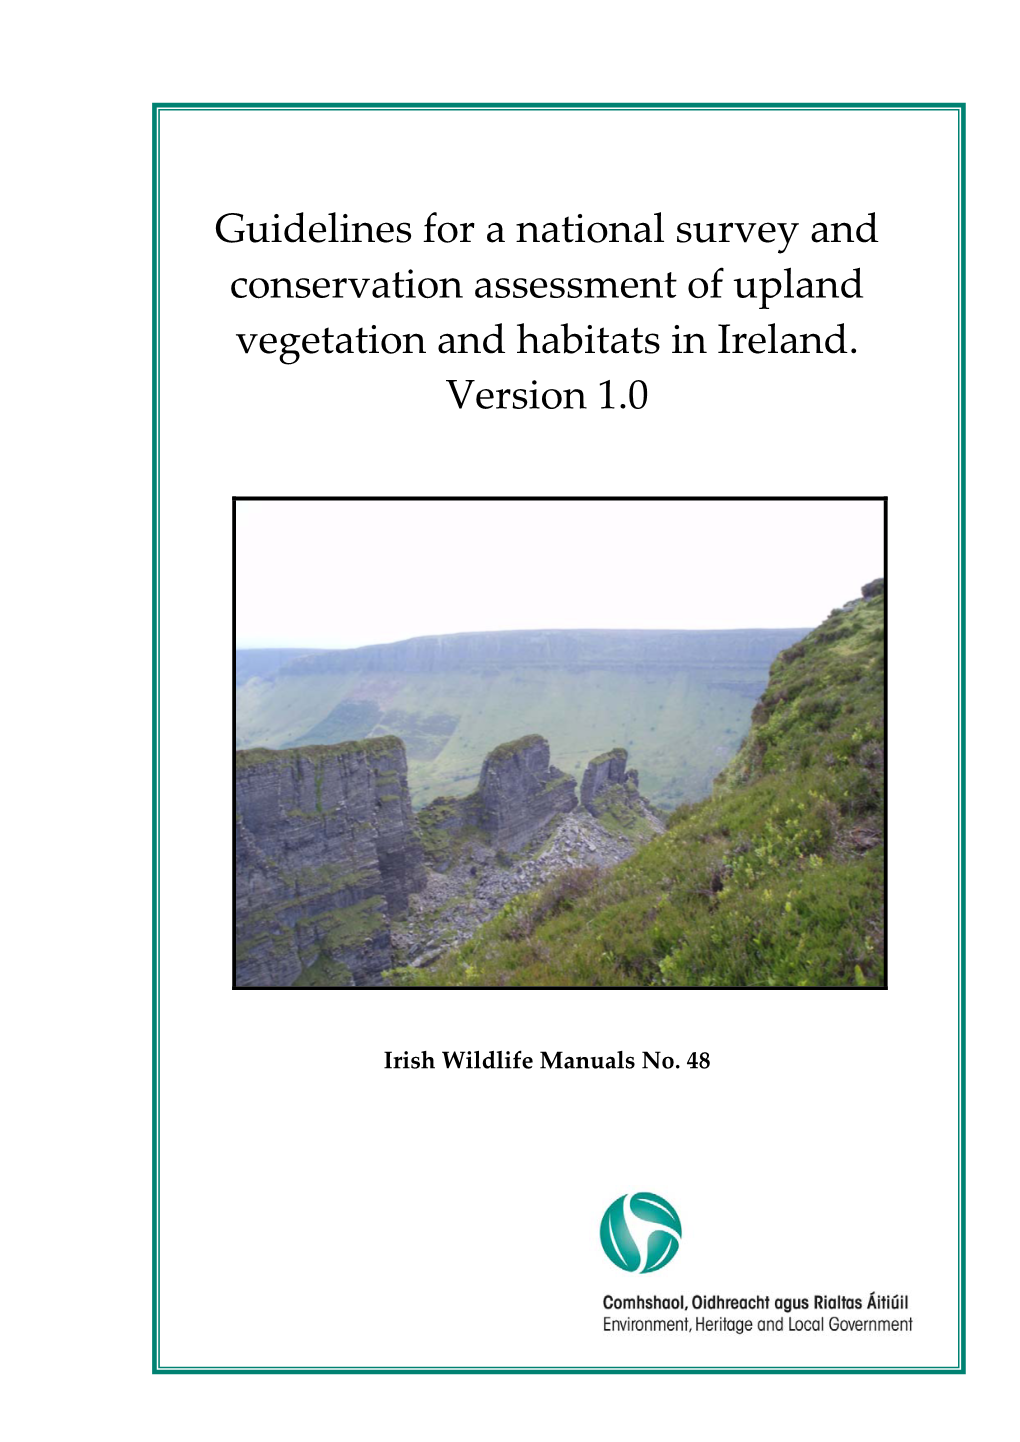 Guidelines for a National Survey and Conservation Assessment of Upland Vegetation and Habitats in Ireland